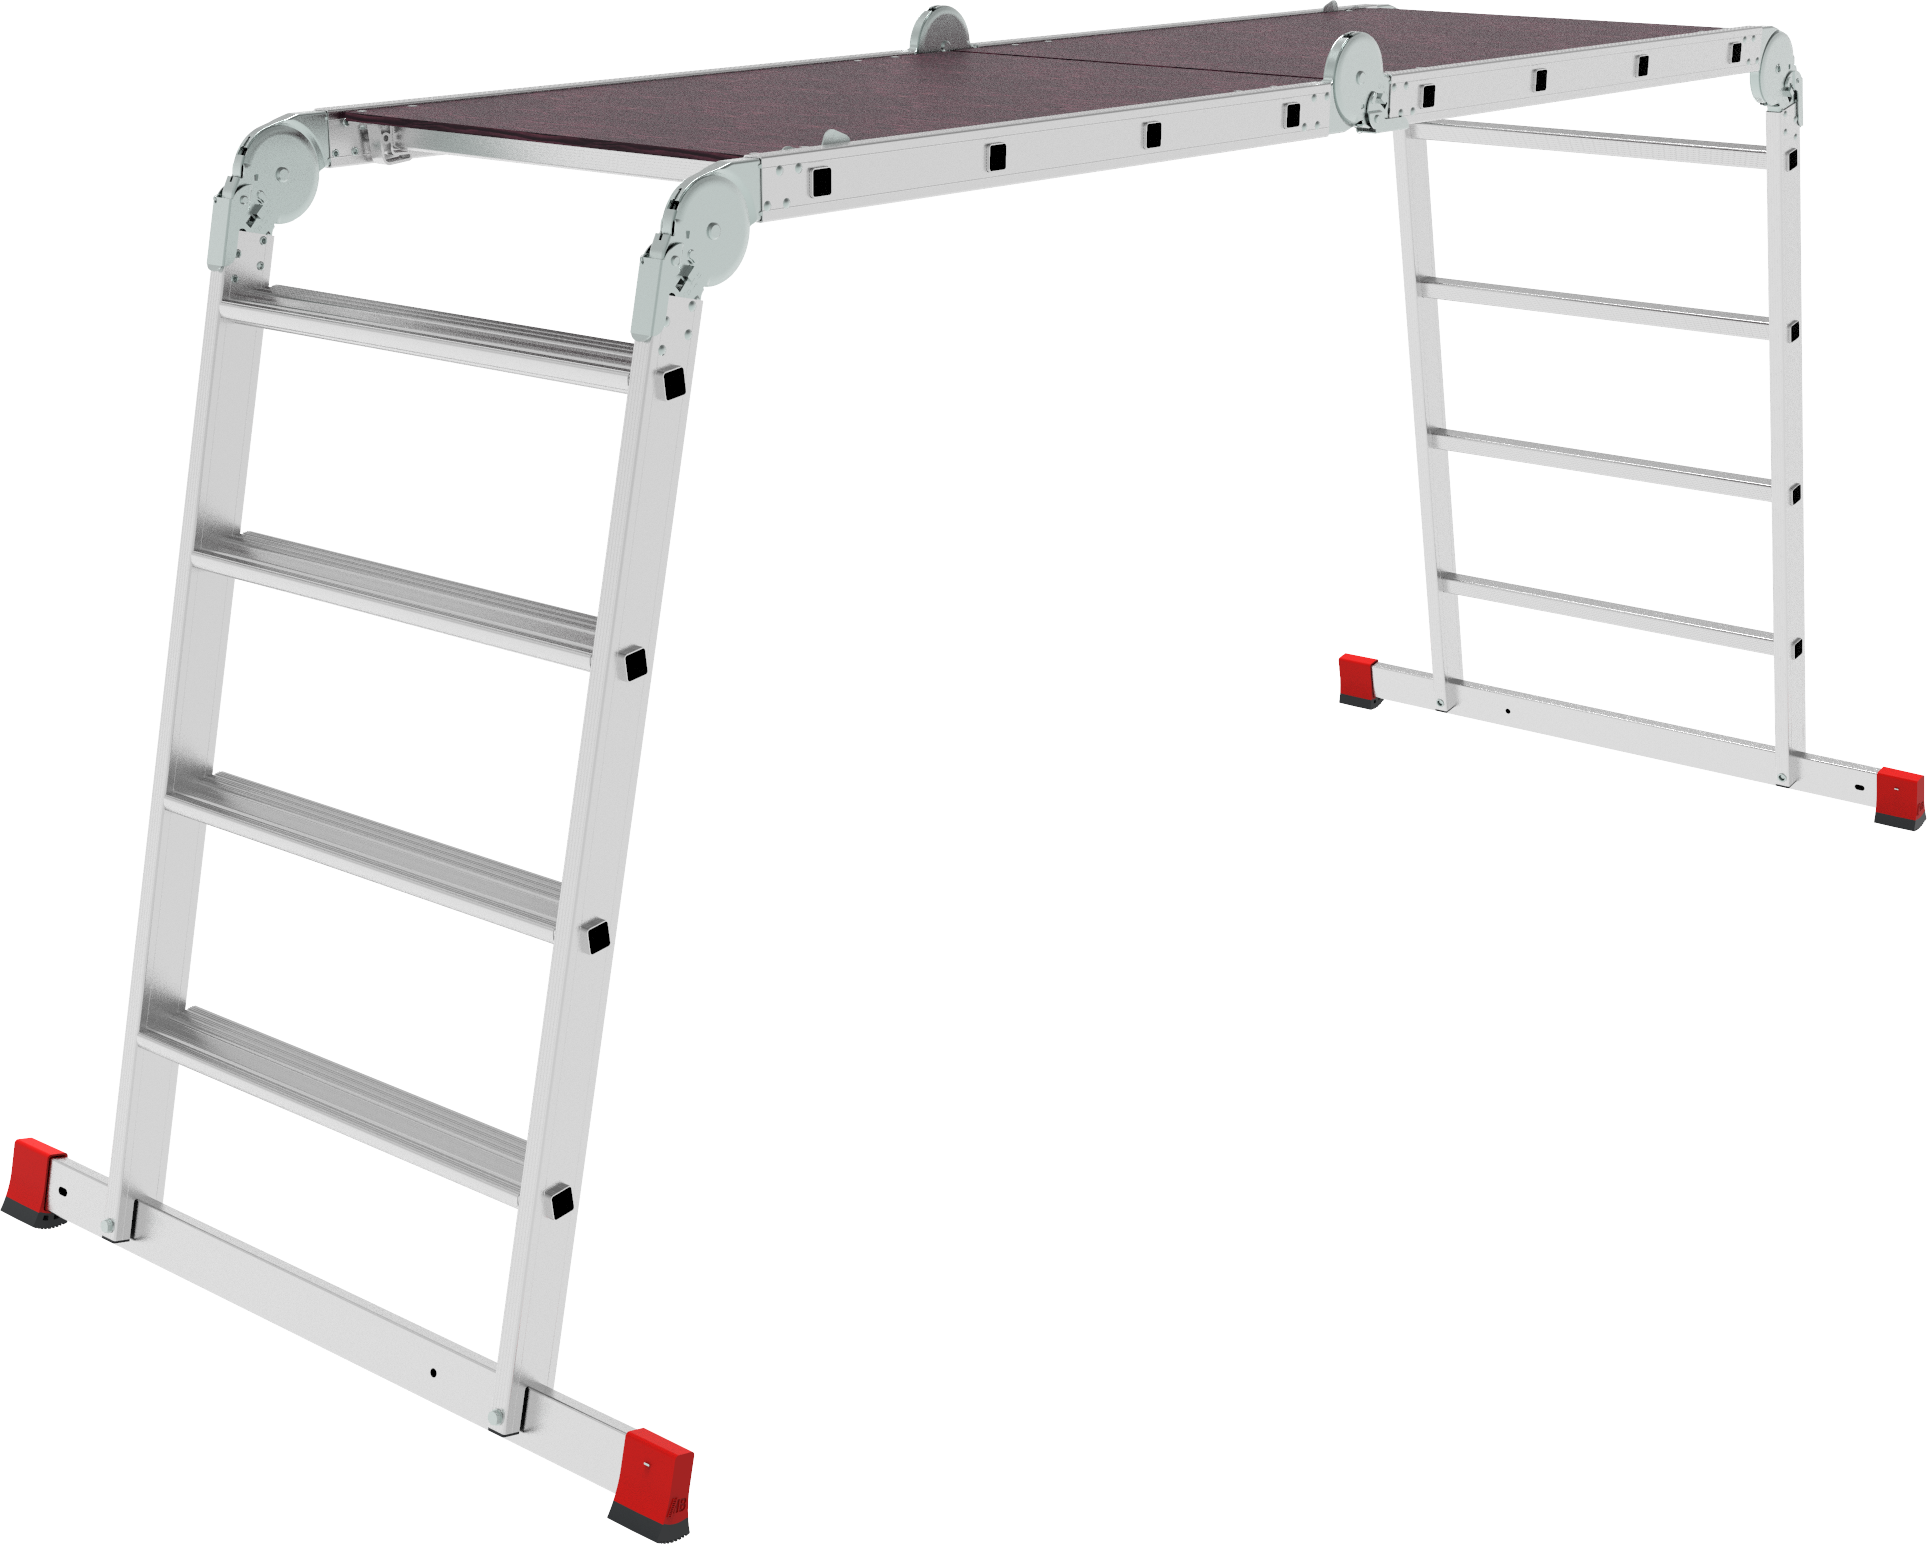 Multipurpose aluminum professional hinged rung ladder 650 mm width with 80 mm flanged steps and platform NV3335 sku 3335404